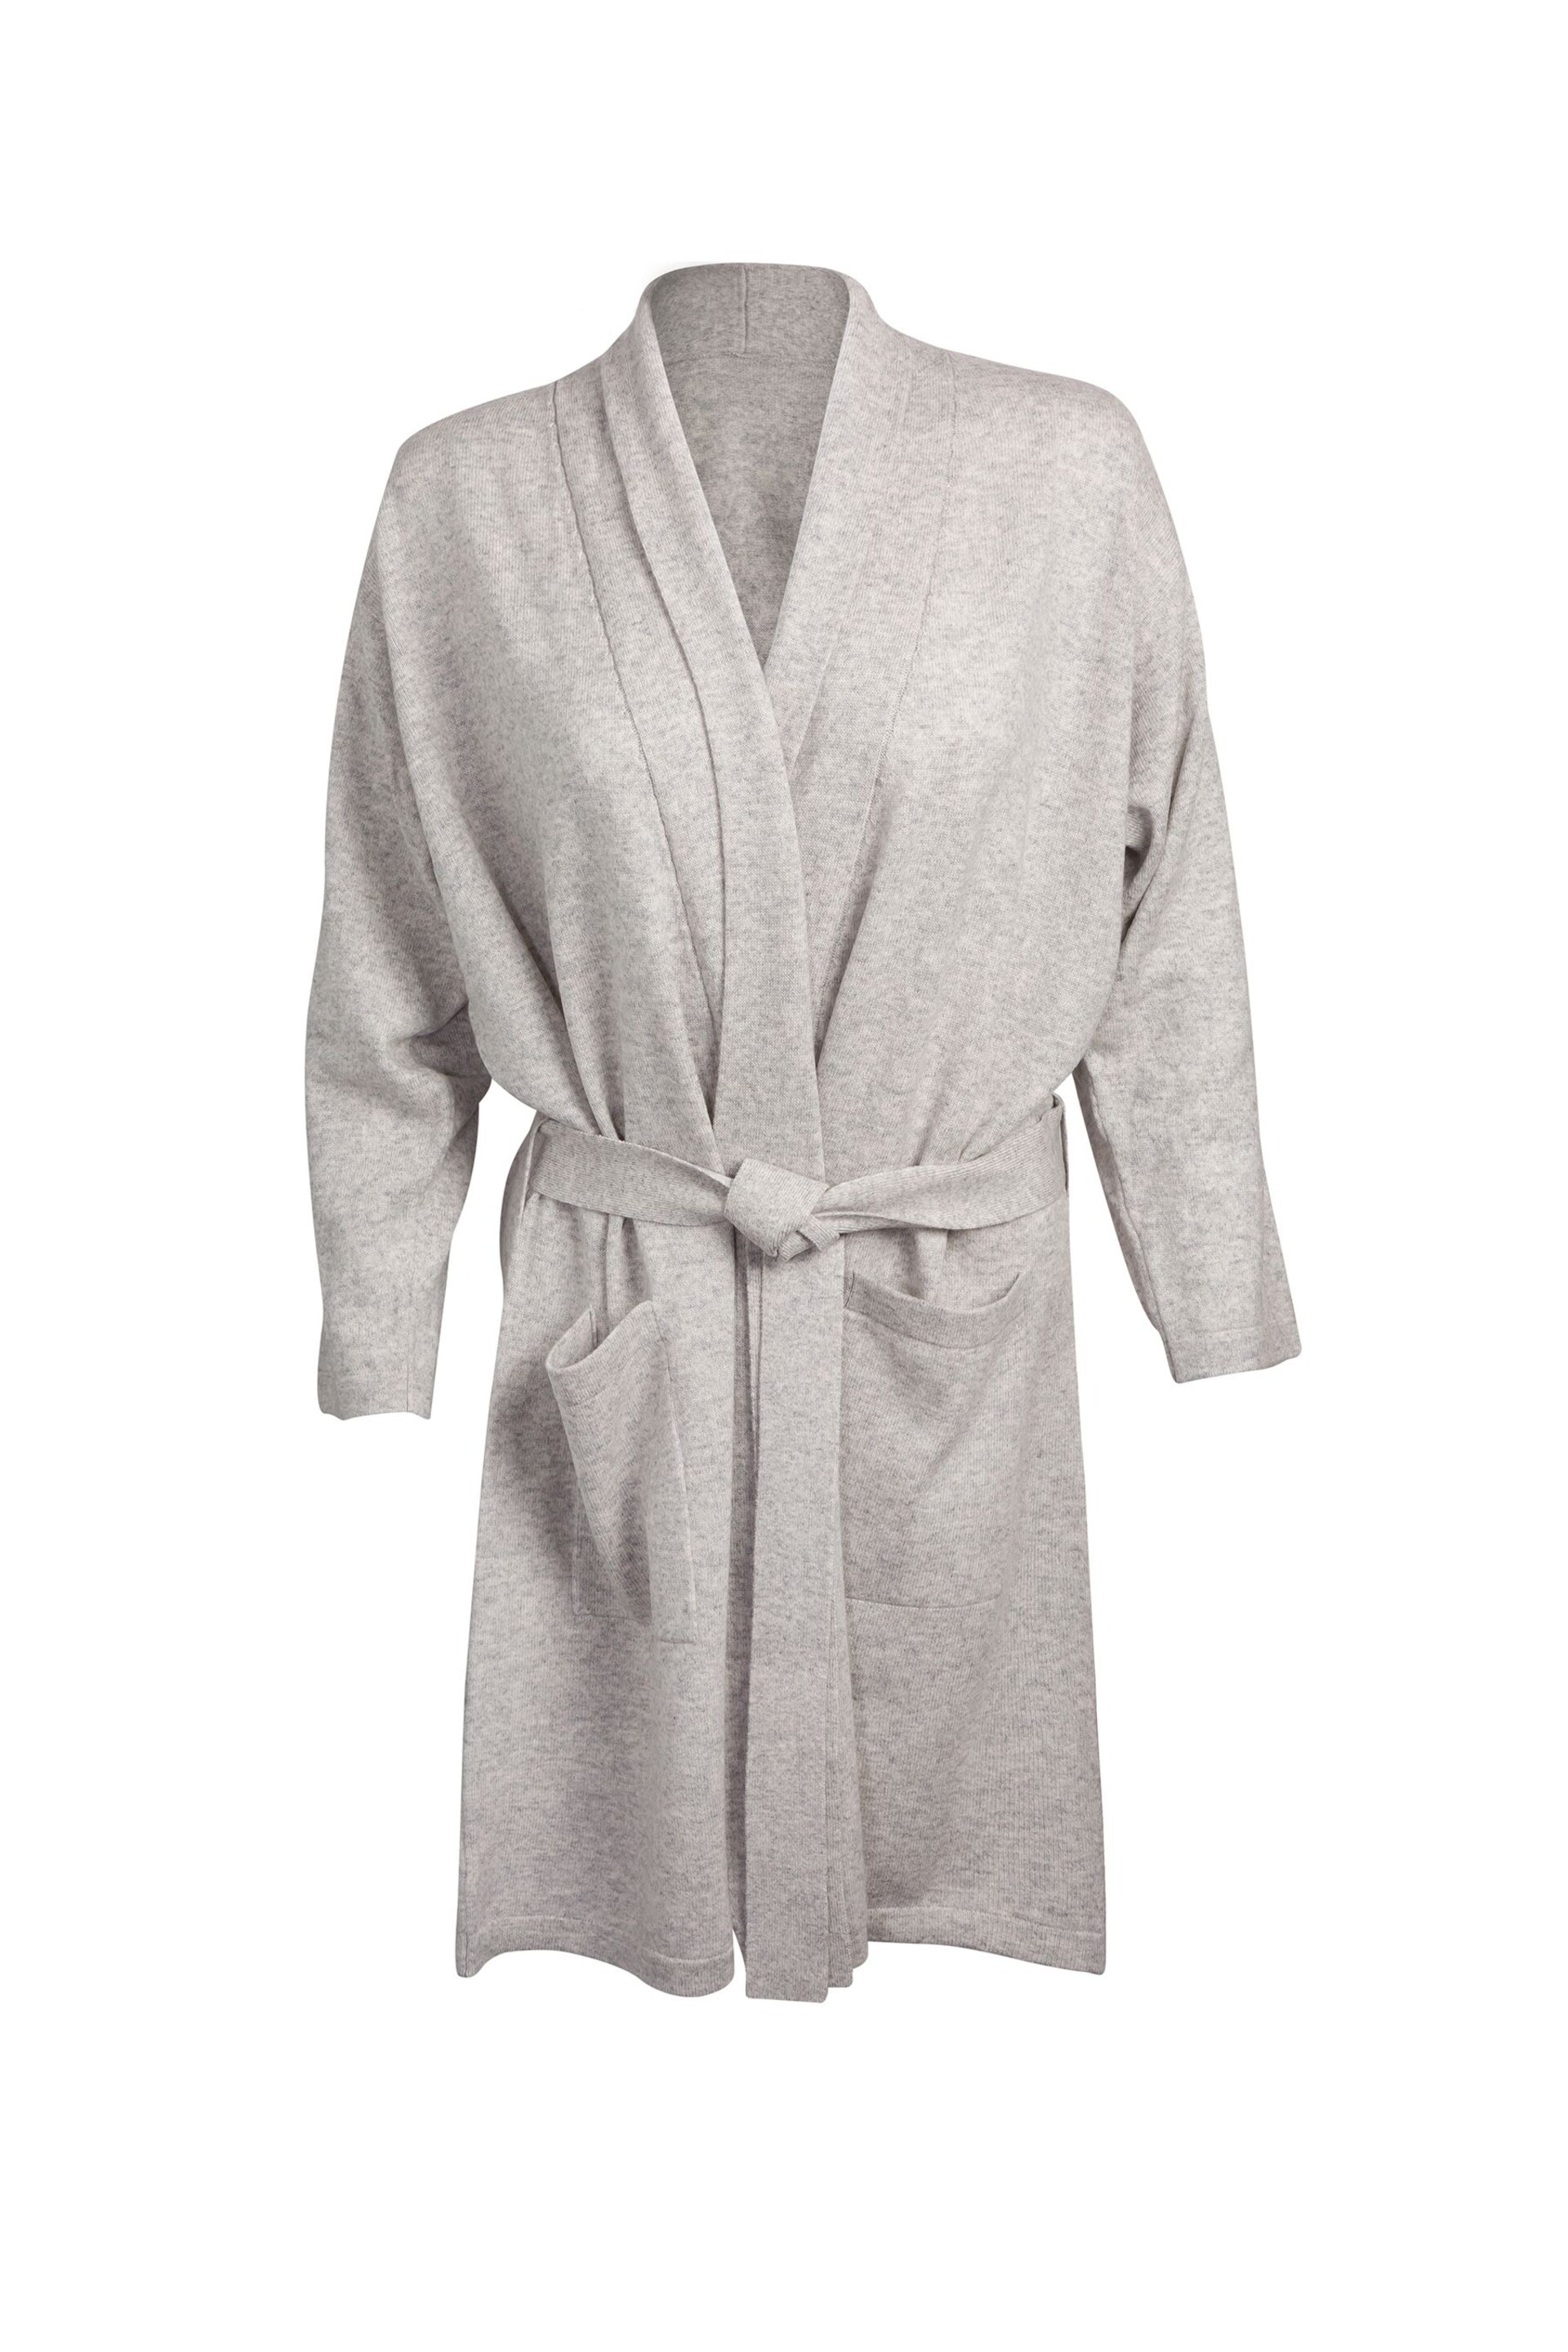 Pure Luxuries London Hallbeck Cashmere & Merino Wool Dressing Gown - Image 2 of 4